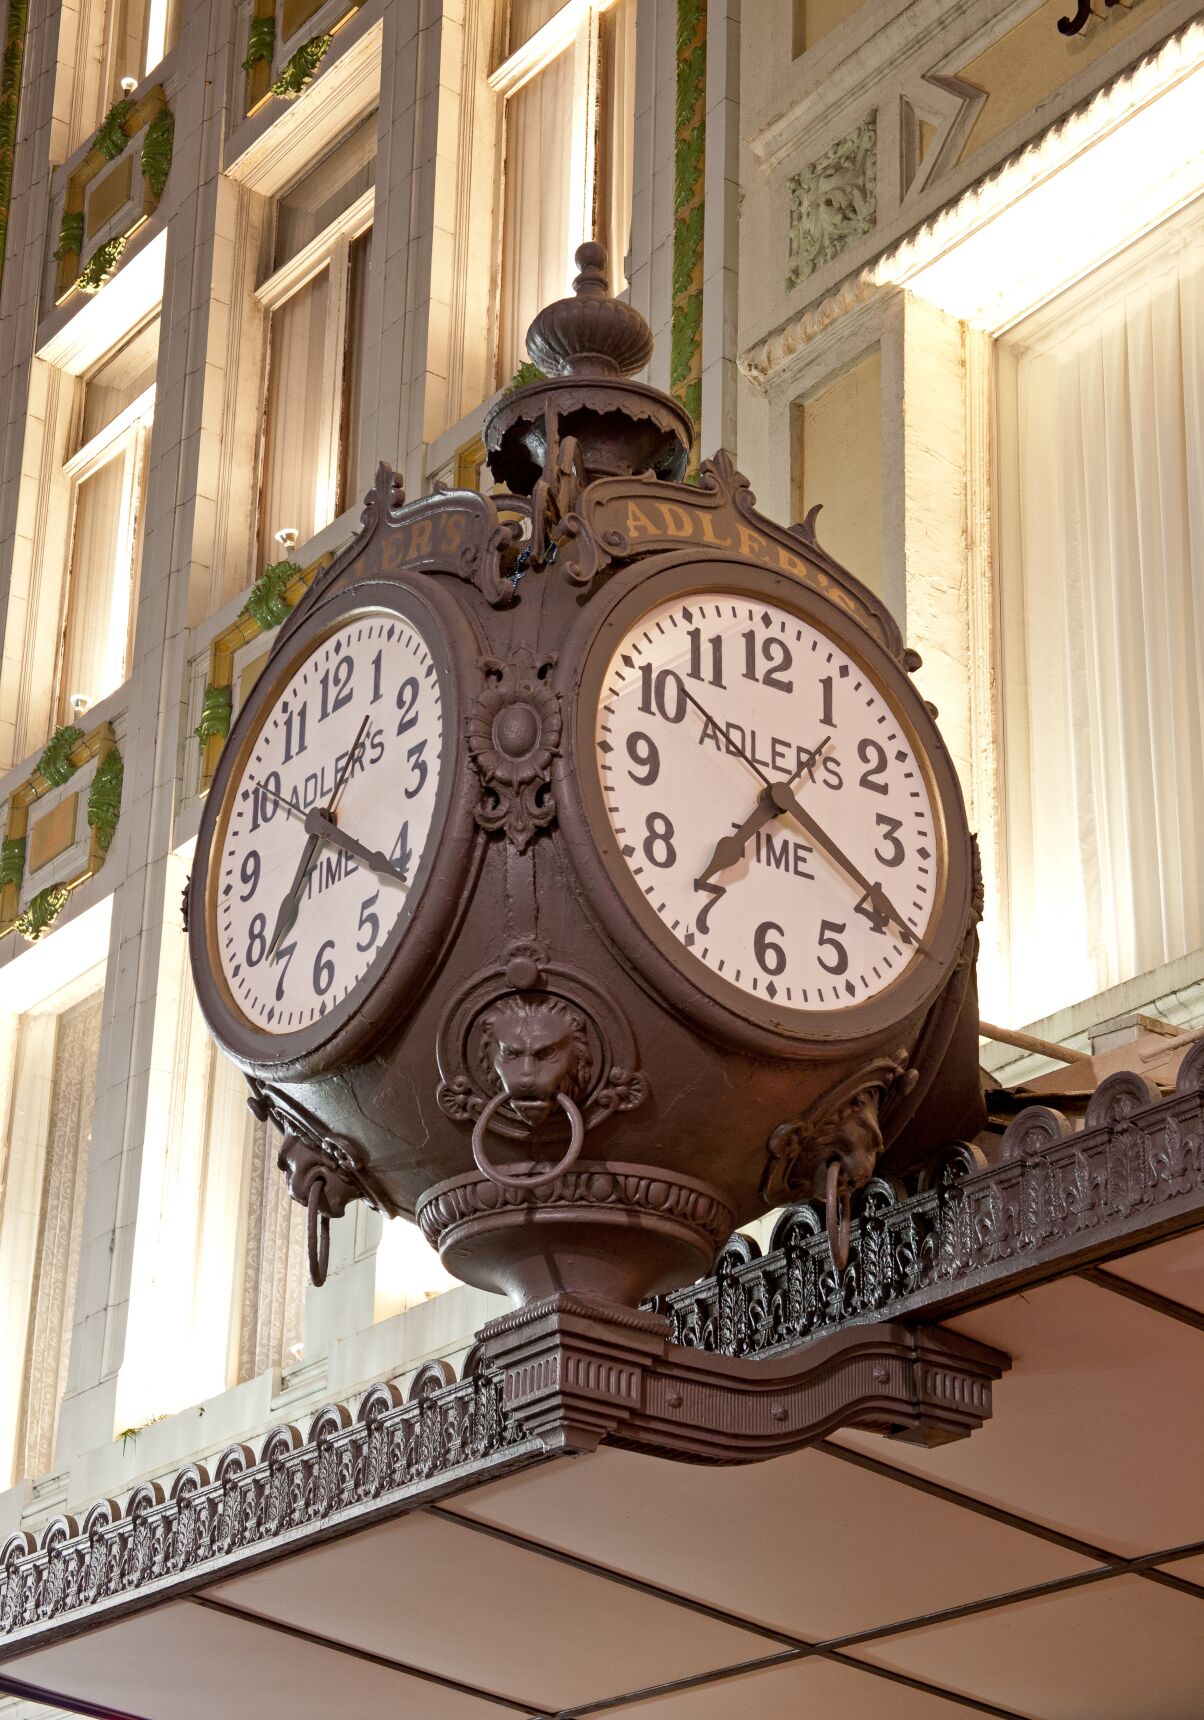 How Daylight Saving Time affects notable New Orleans clocks